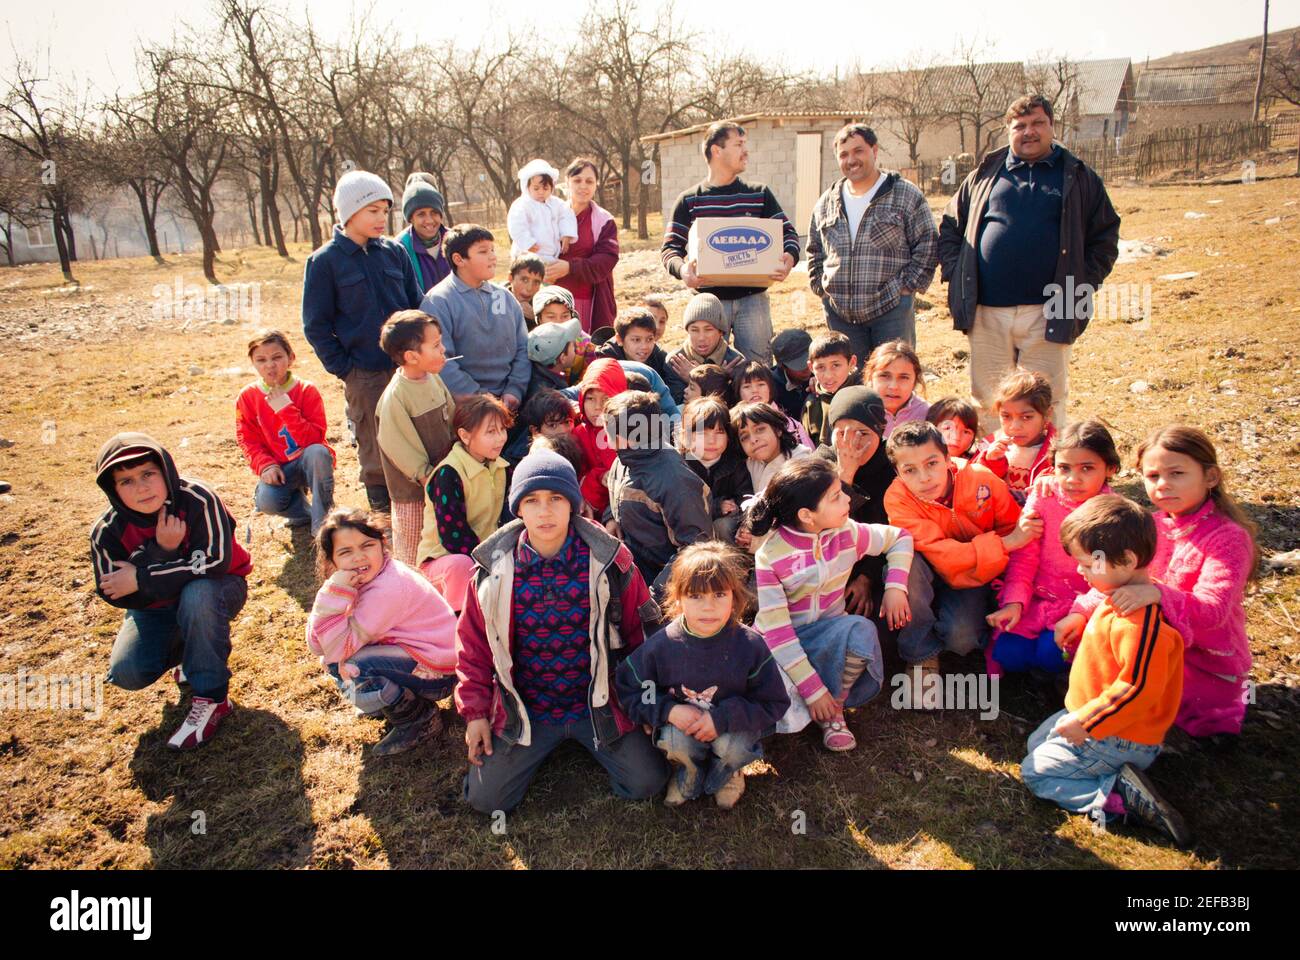 SEREDNIE, UKRAINE - MARCH 09, 2011: Roma or Gypsy community needs support to survive Stock Photo